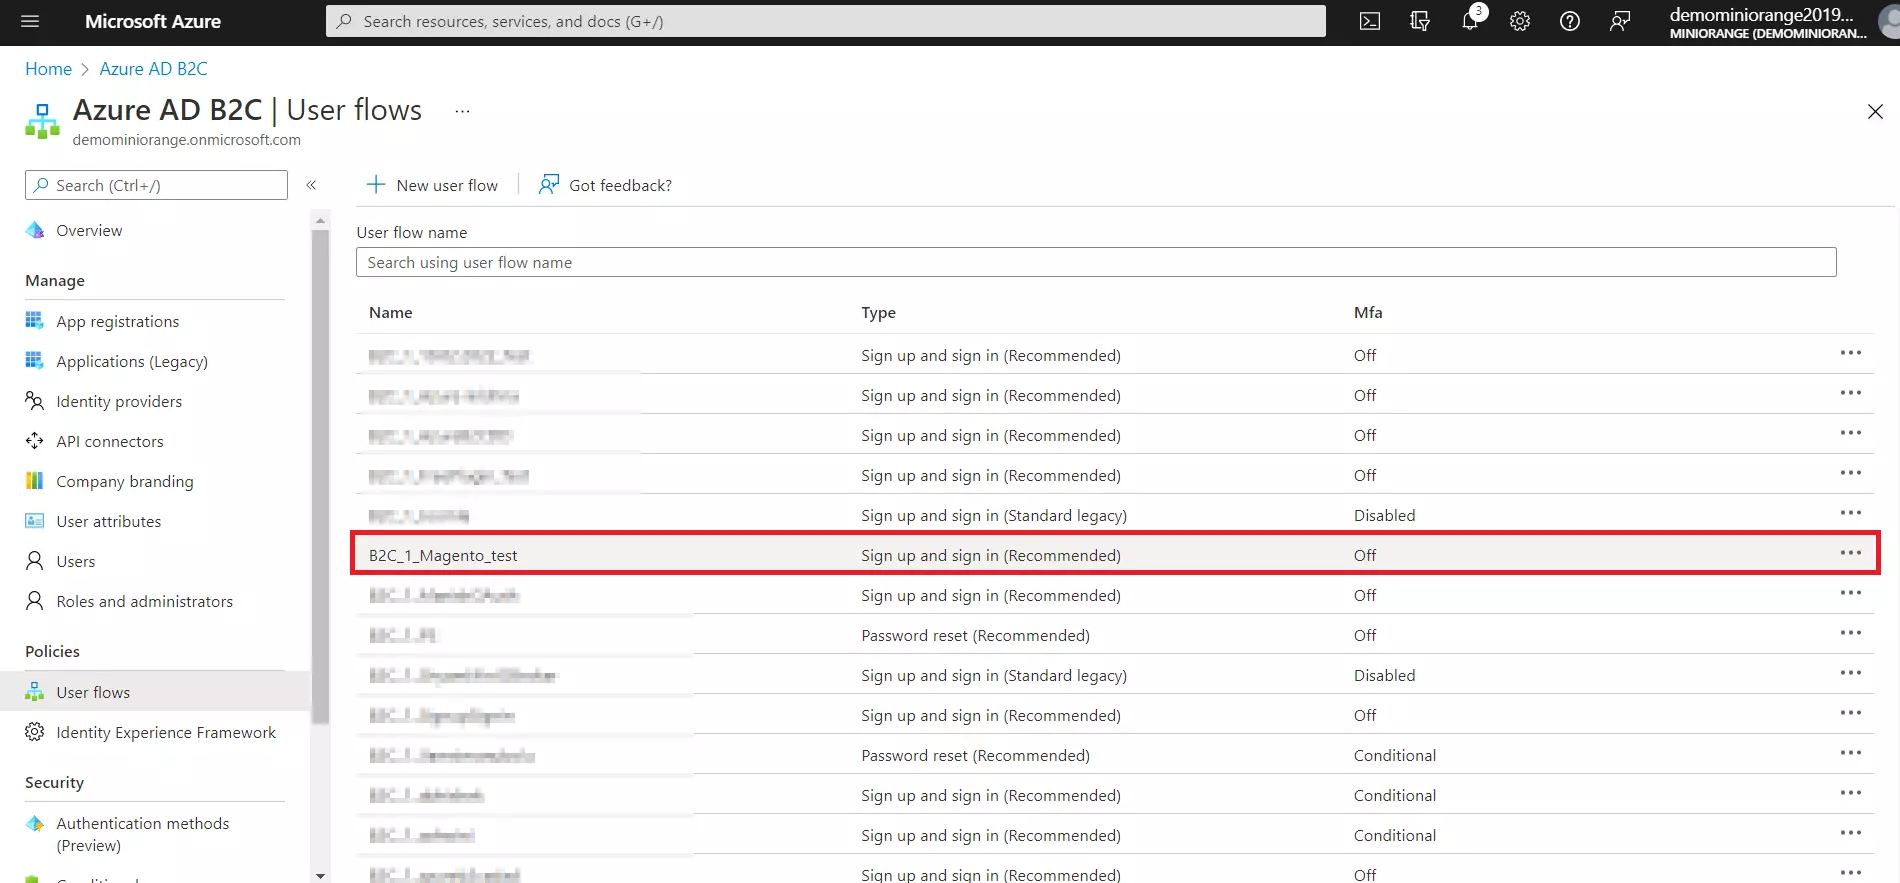  Azure AD B2C SSO OAuth / OpenID / OIDC Single Sign On, Azure AD SSO select user flow